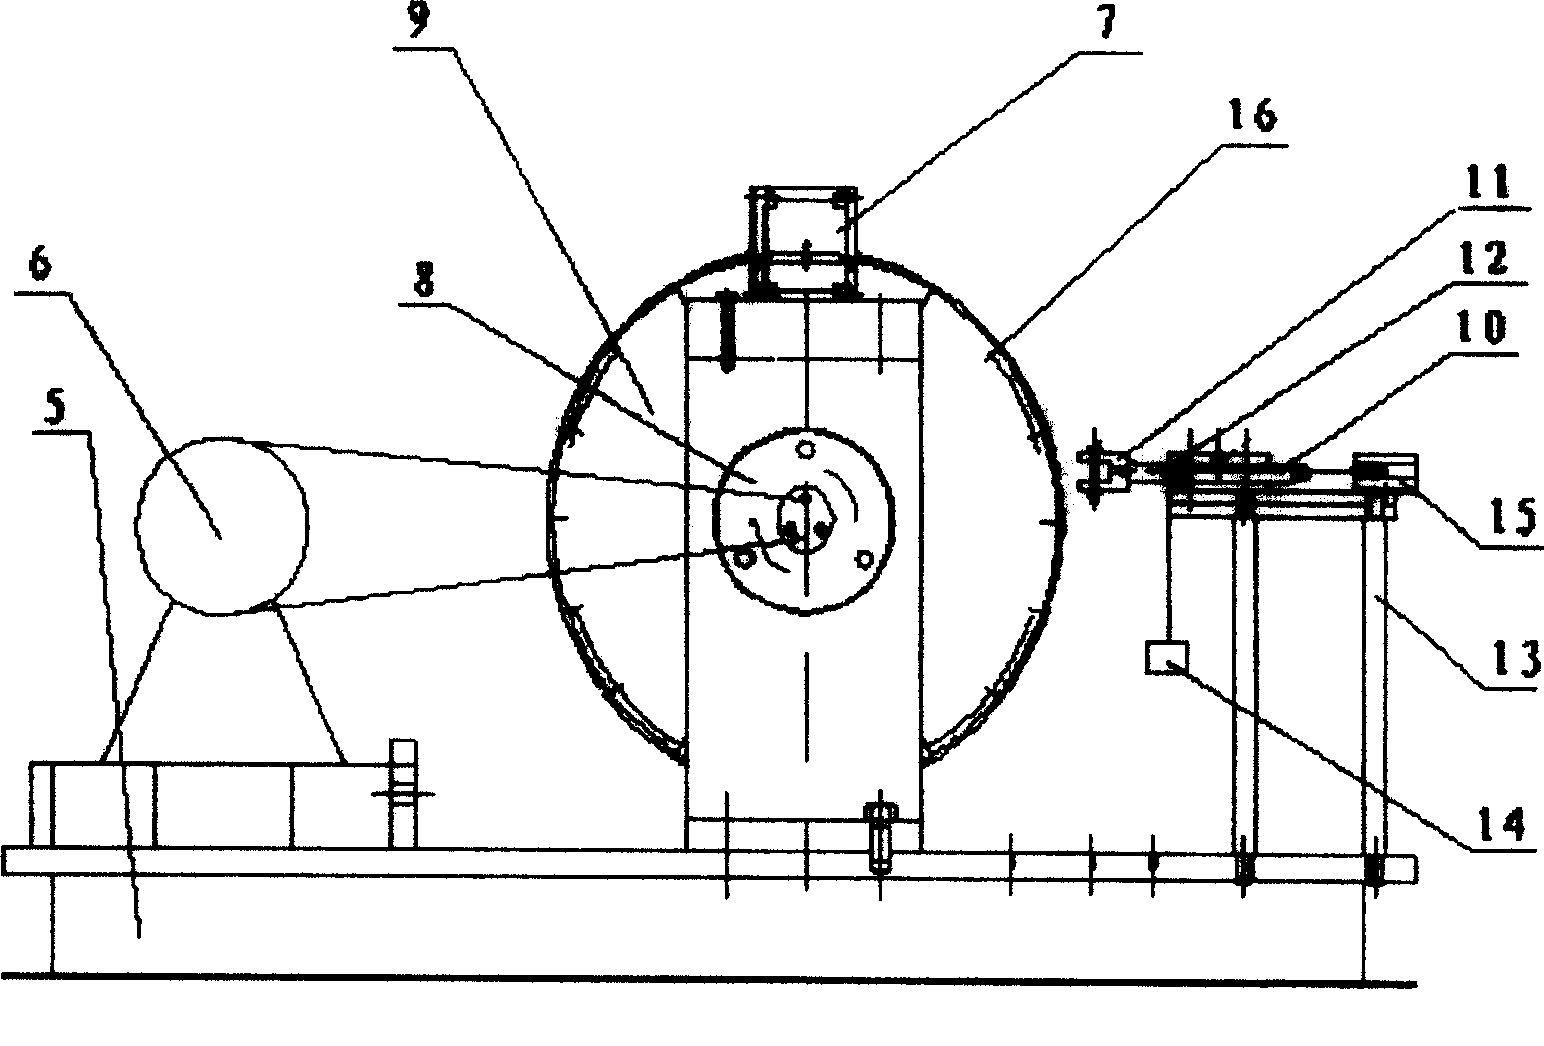 High-speed sliding electrical wear measuring device